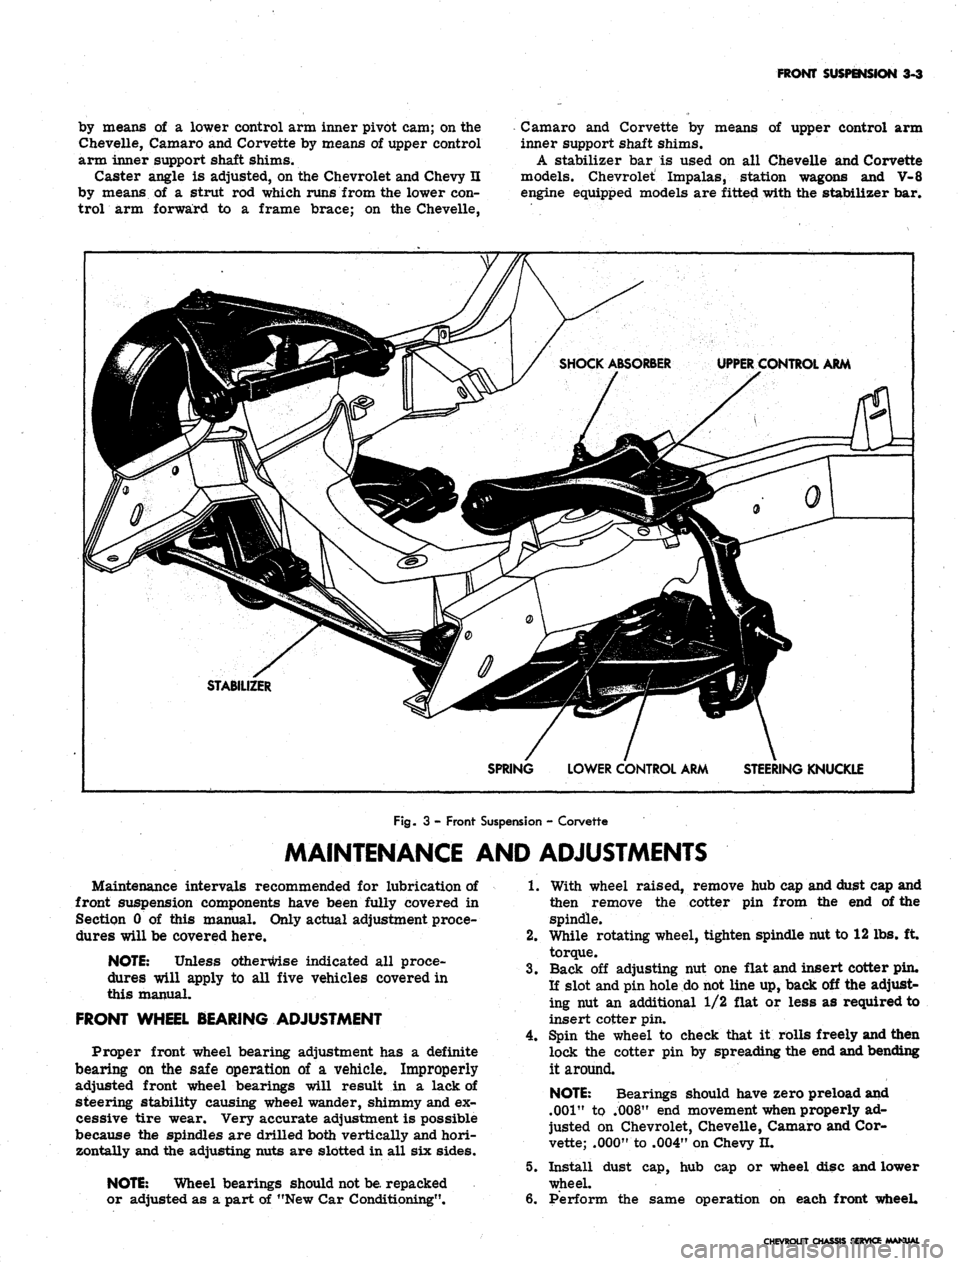 CHEVROLET CAMARO 1967 1.G Chassis Repair Manual 
FRONT SUSPENSION 3-3

by means of a lower control arm inner pivot cam; on the

Chevelle, Camaro and Corvette by means of upper control

arm inner support shaft shims.

Caster angle is adjusted, on th